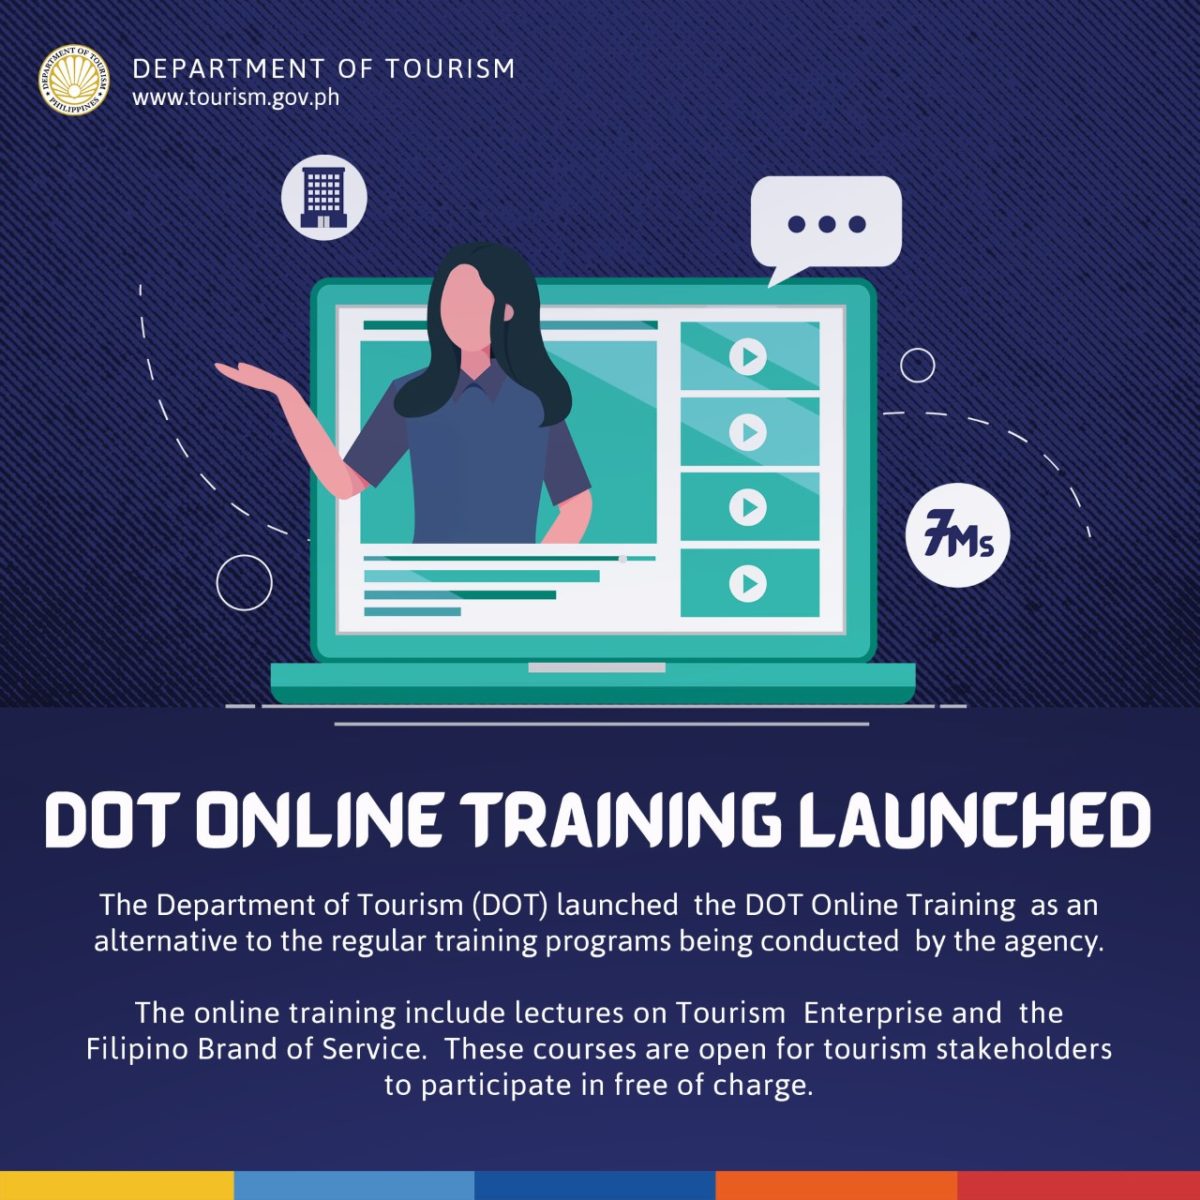 DOT OFFERS ONLINE “ENHANCED OPPORTUNITY” TRAINING FOR TOURISM STAKEHOLDERS